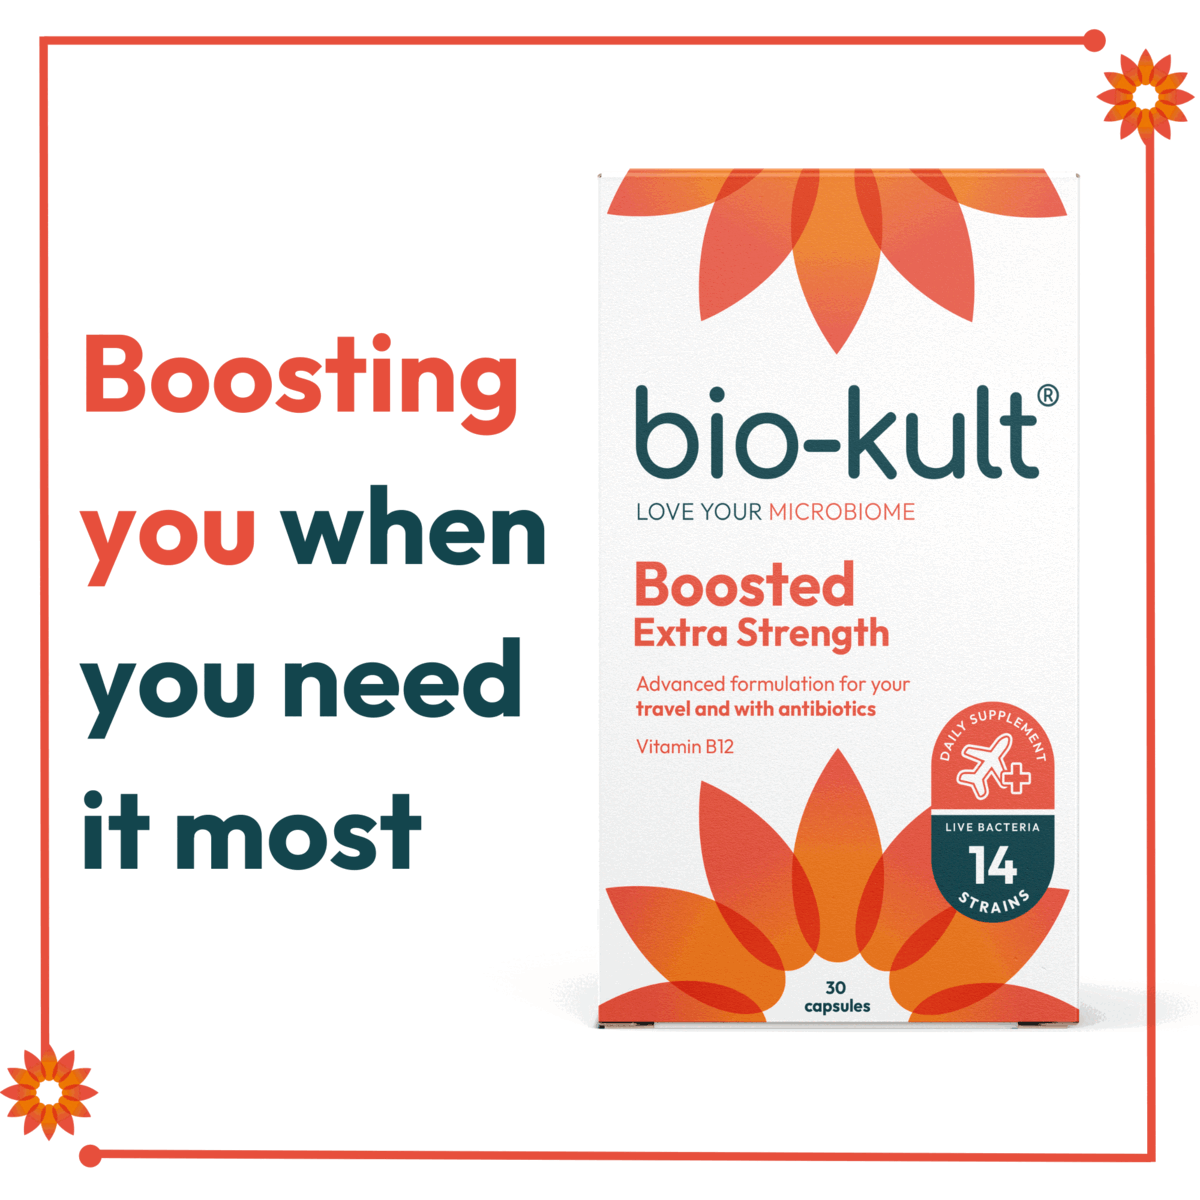 Boosting you when you need it most, the little flower with a whole lot of power, new look some award winning bacteria inside!higly recommended - life saver, fantastic - i just can't believe it, great product, we can't hold in our exictment!